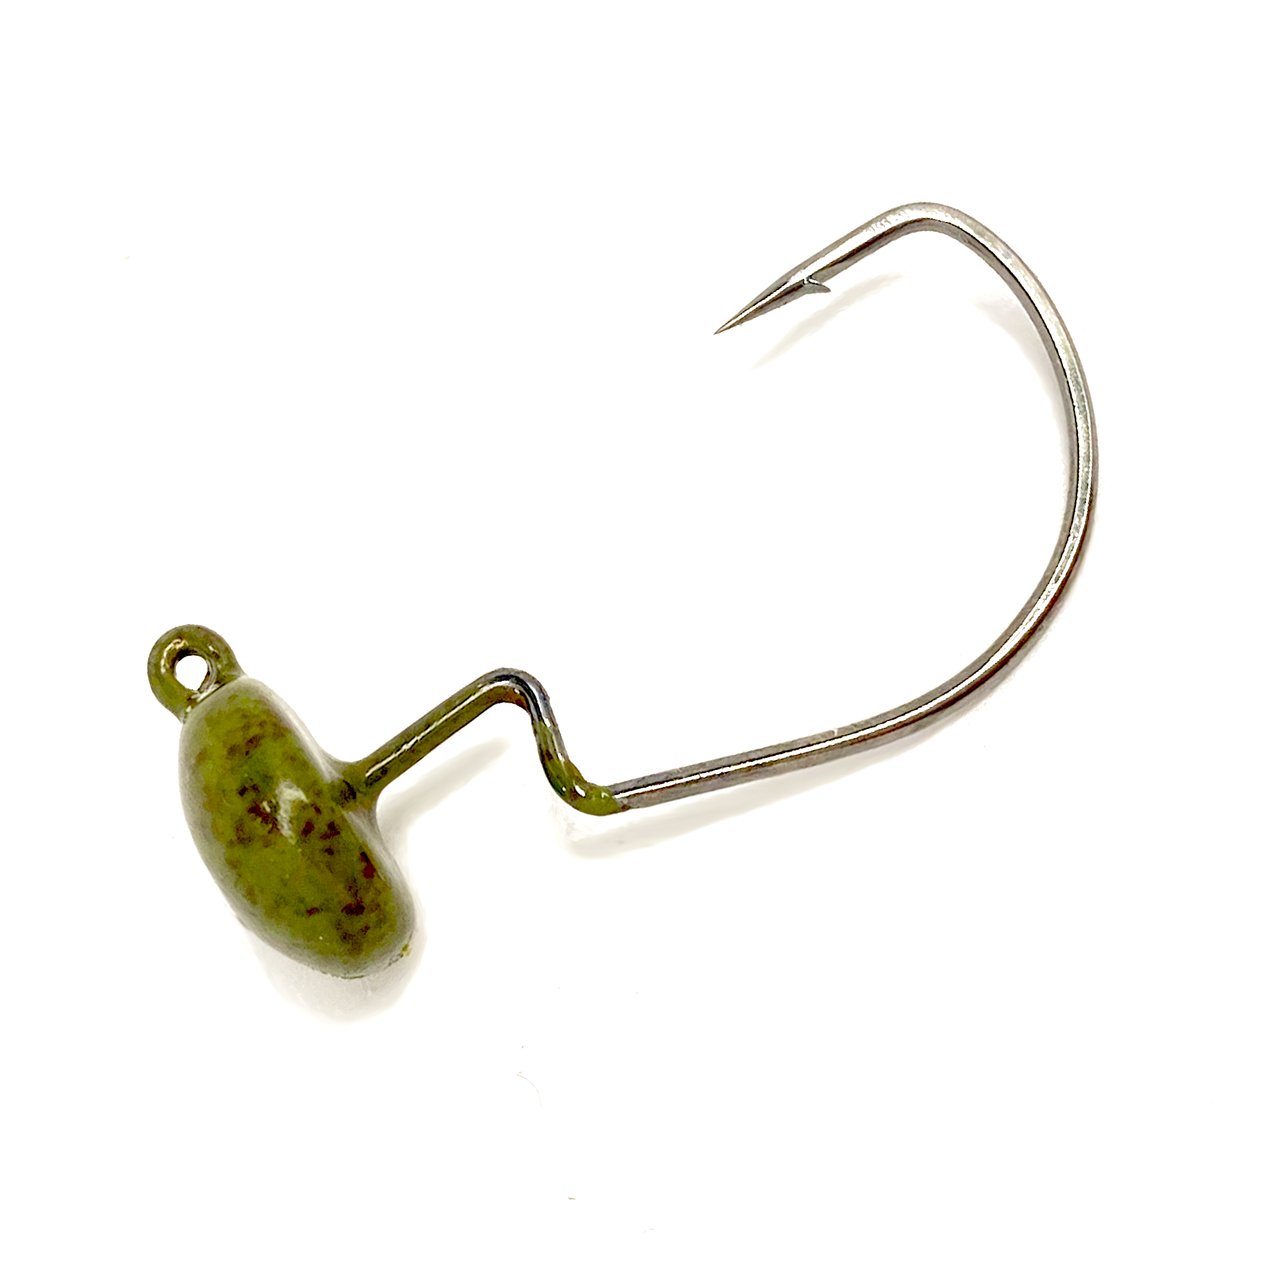 Weedless Ned - 3 pack